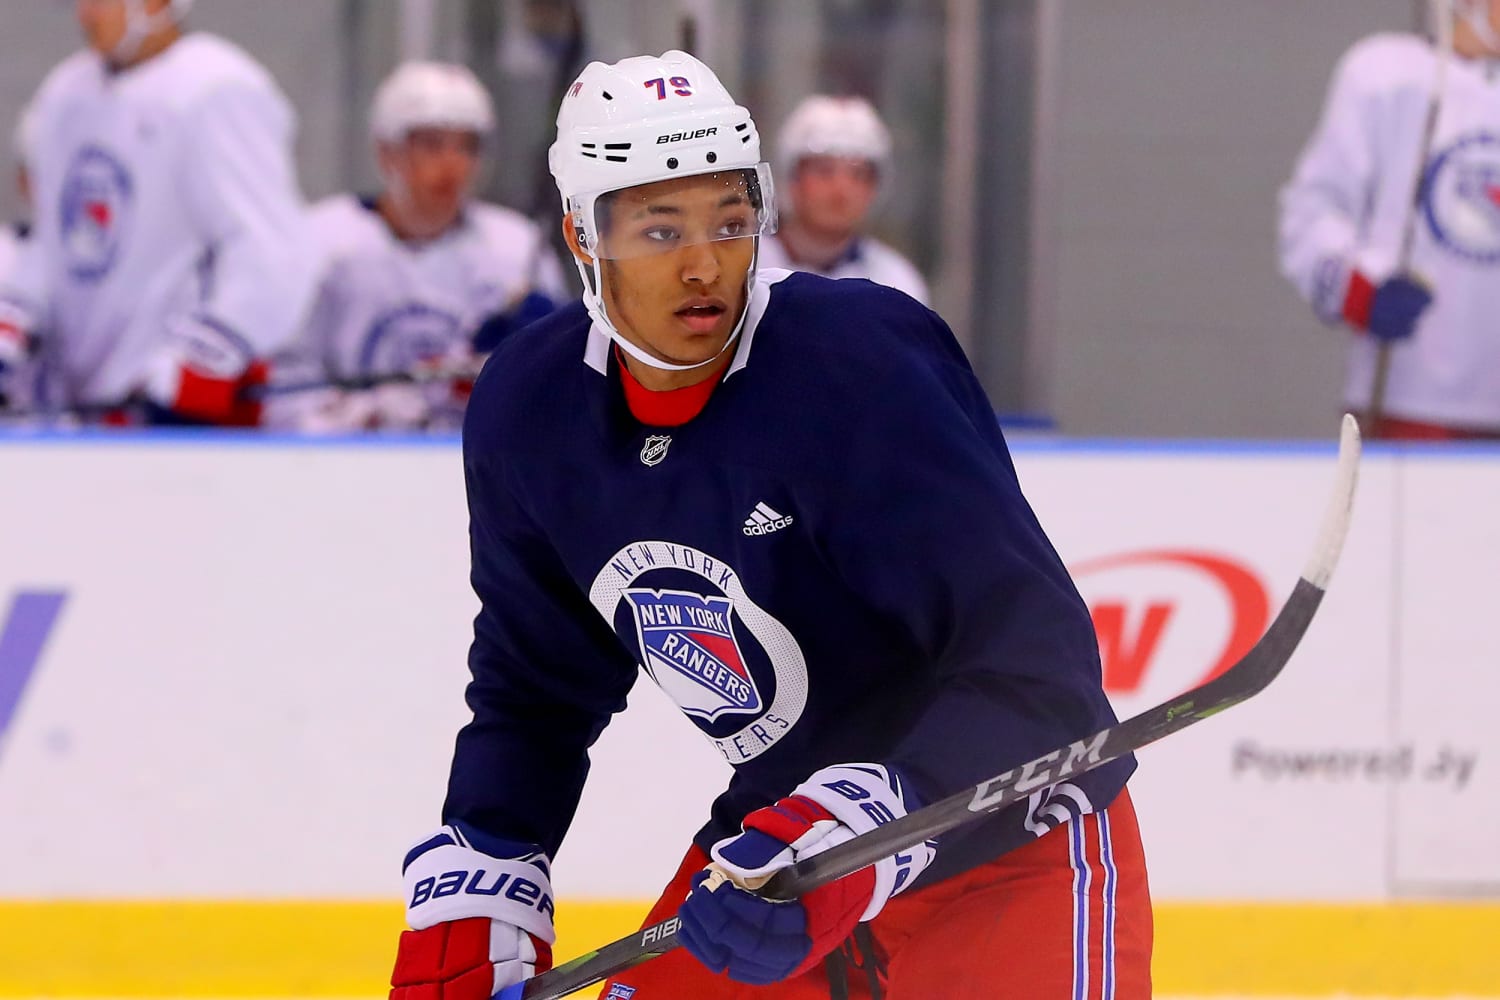 USA Hockey's K'Andre Miller proves that looks, and stereotypes